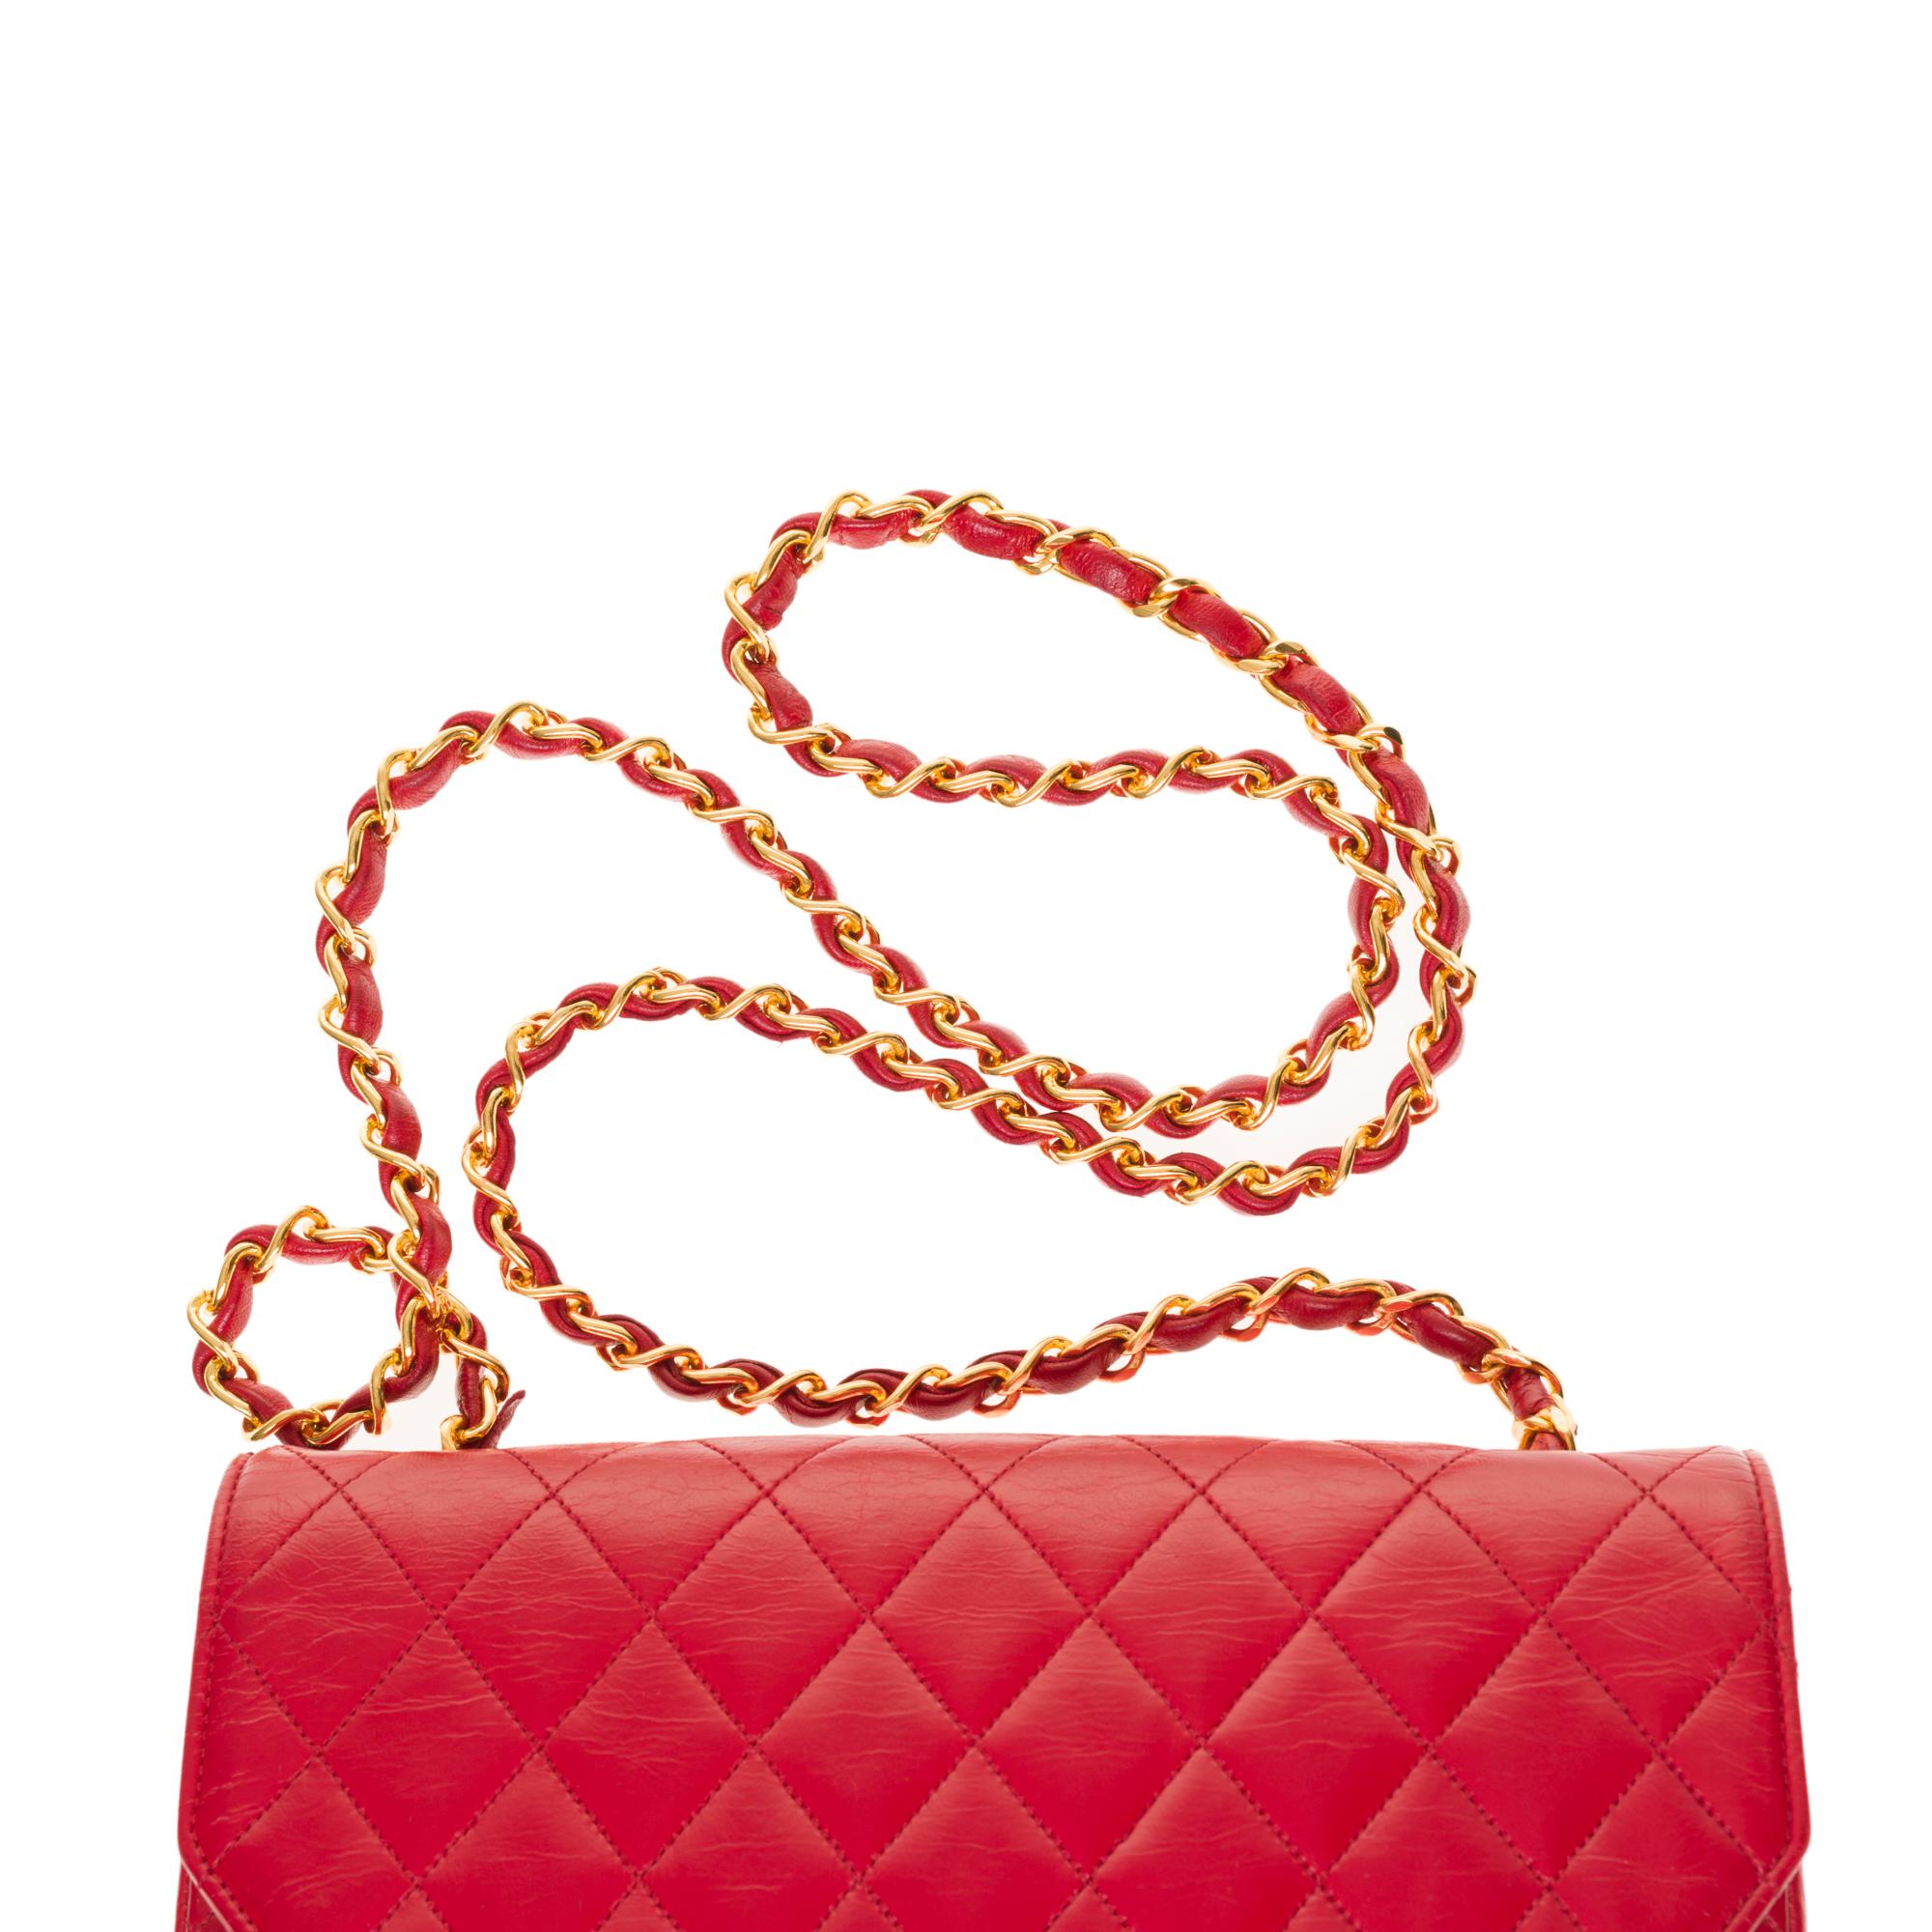 Chanel Classic Flap shoulder bag in Red quilted lambskin, GHW 1